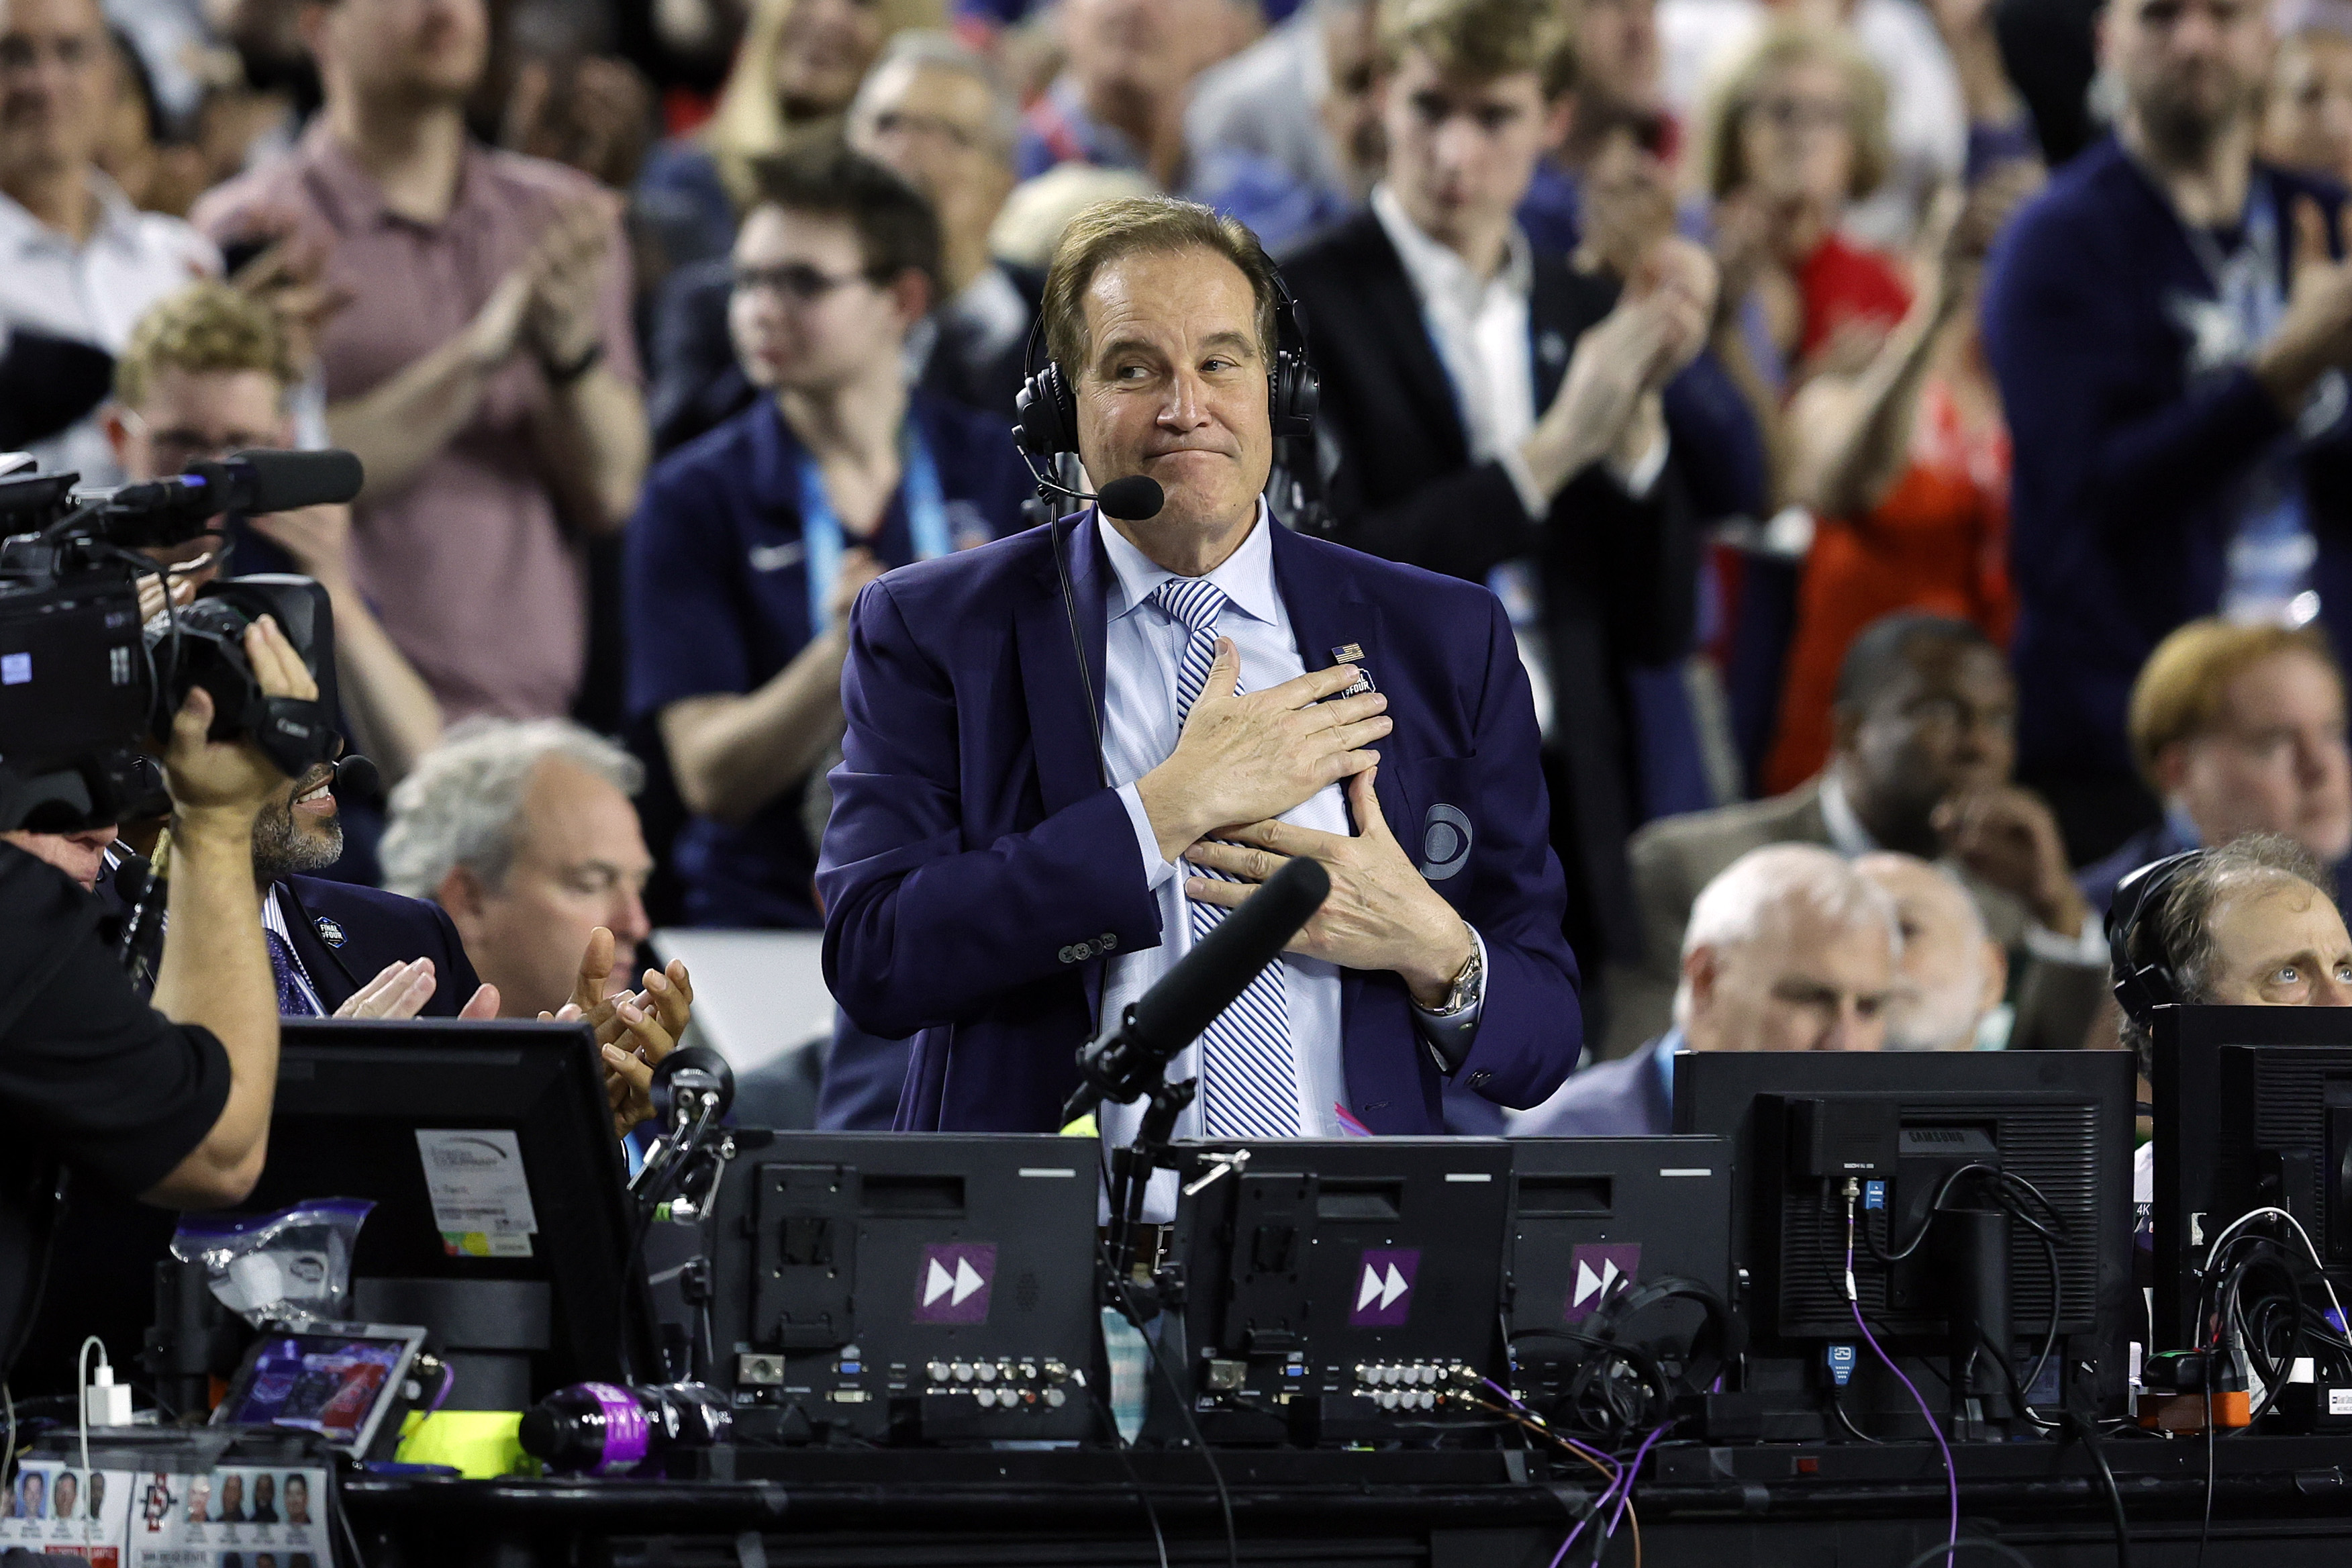 HOUSTON, TEXAS - APRIL 01: Announcer Jim Nantz reacts during the first half in the game between the Florida Atlantic Owls and San Diego State Aztecs during the NCAA Men’s Basketball Tournament Final Four semifinal game at NRG Stadium on April 01, 2023 in Houston, Texas.